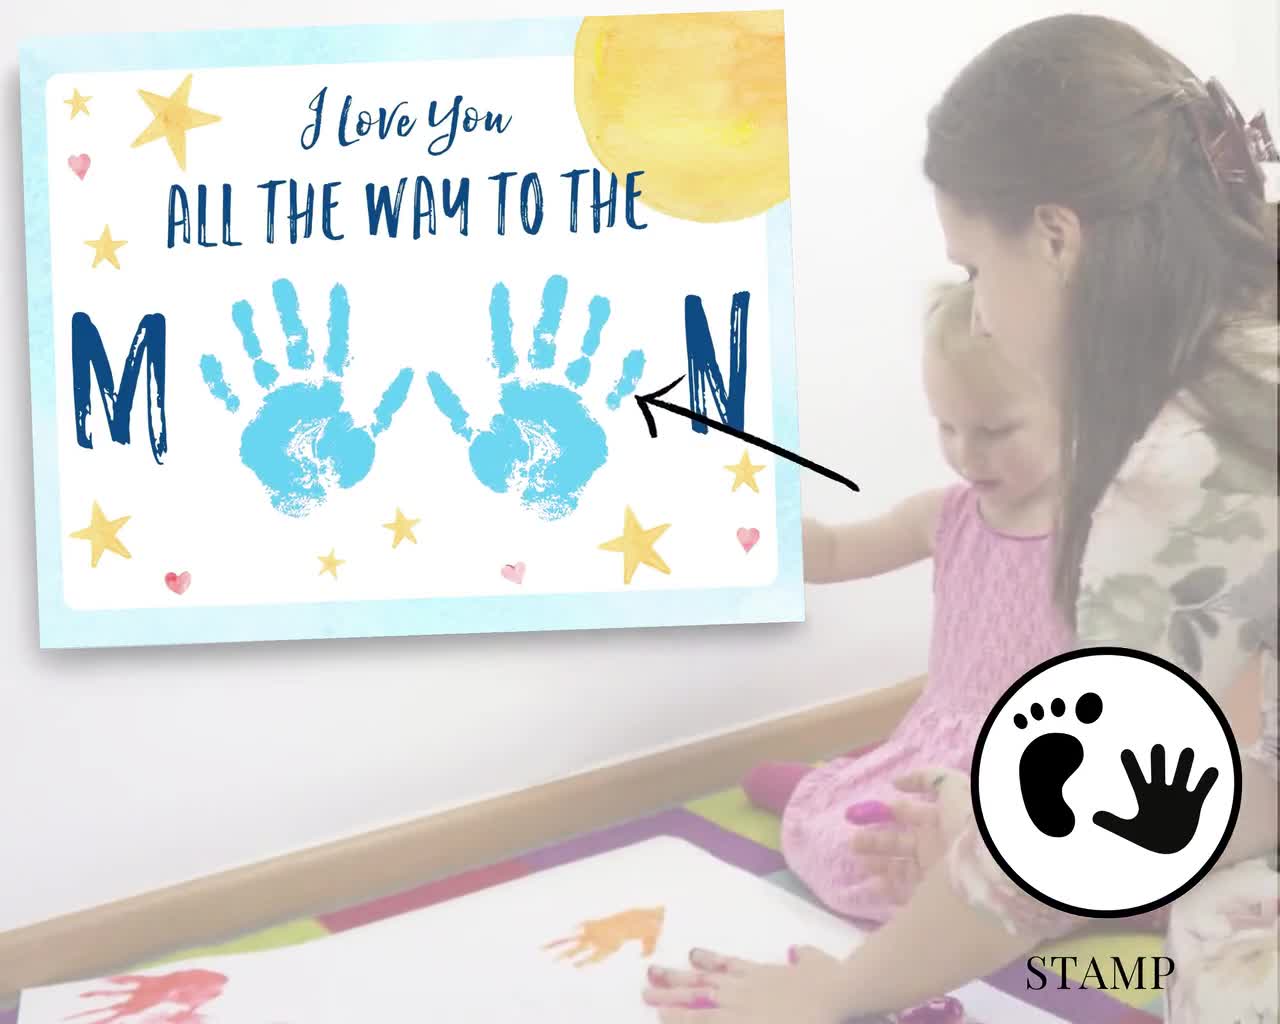 Love You to the Moon Baby Handprint & Footprint Kit – Printables by The  Craft-at-Home Family